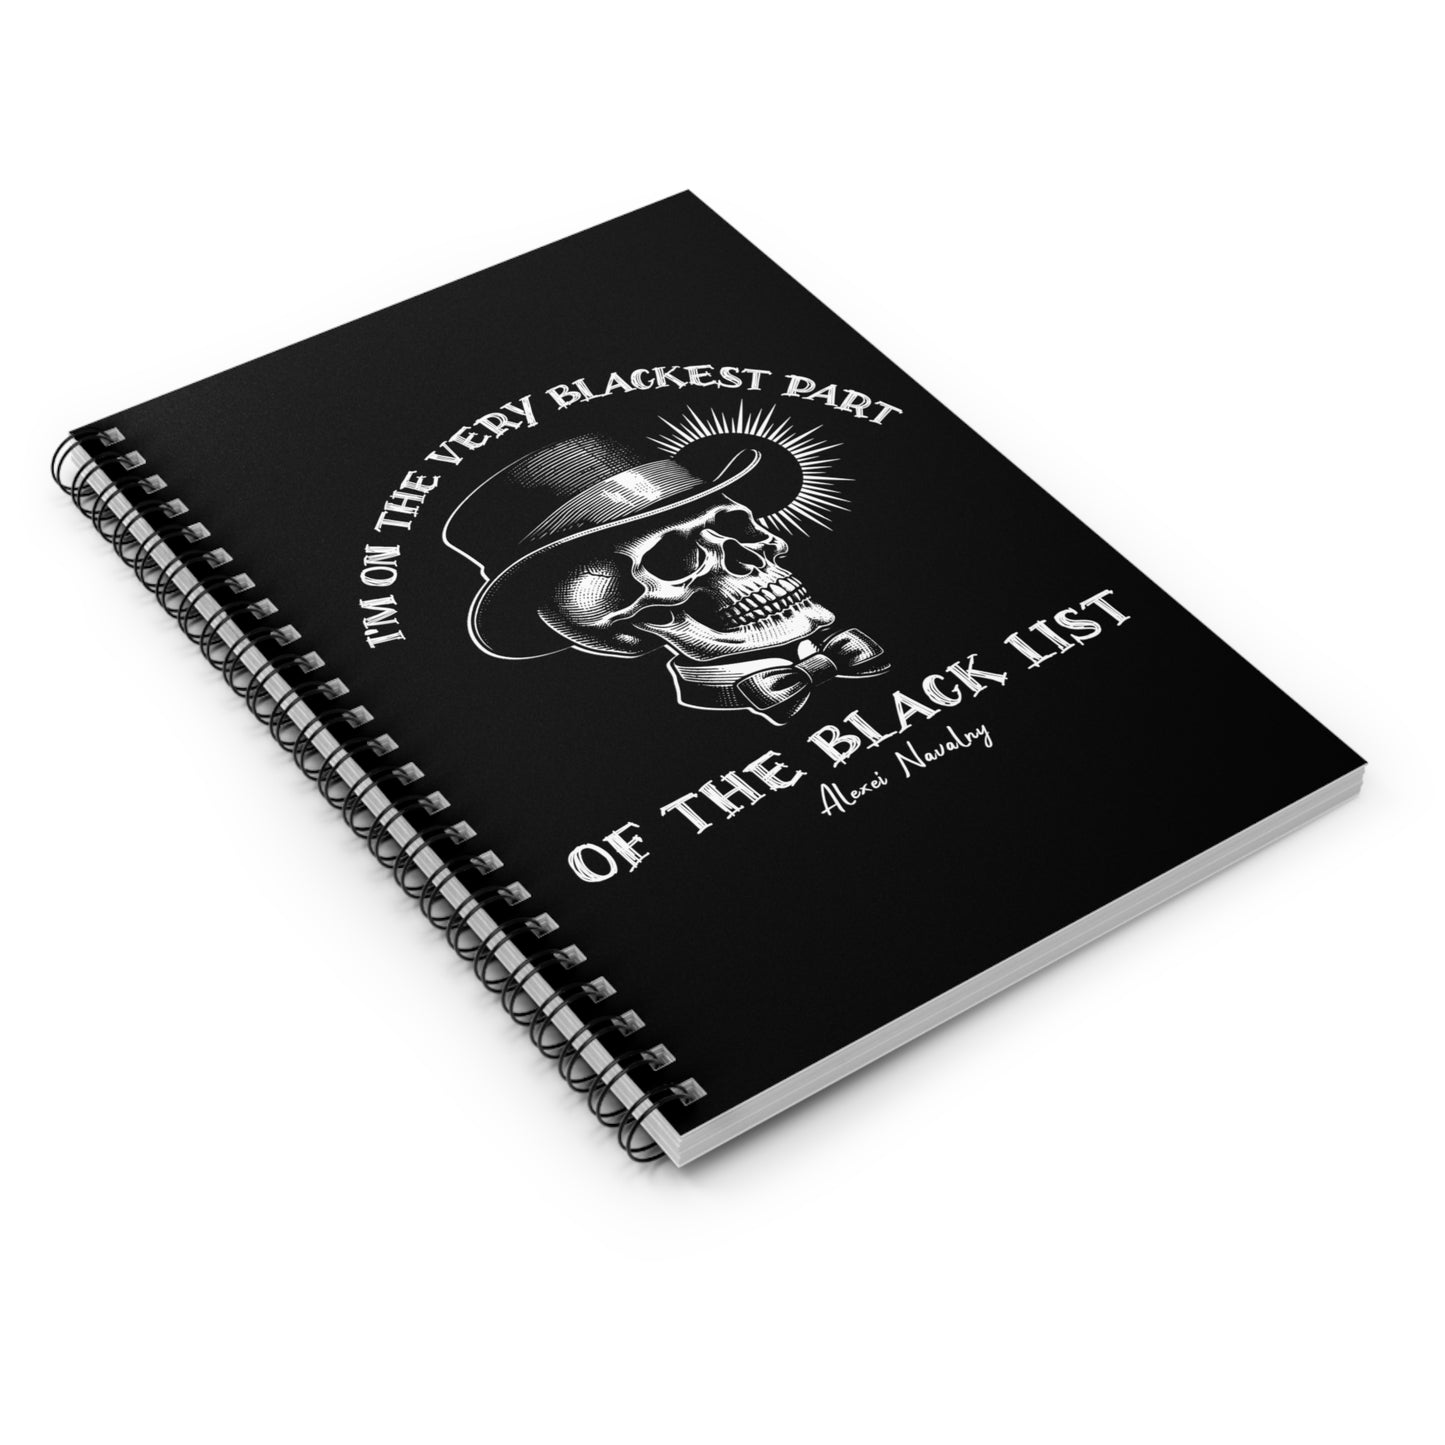 School, work, or personal notebook with trendy skull design and quote from Alexei Navalny "I'm on the very blackest part of the black list"